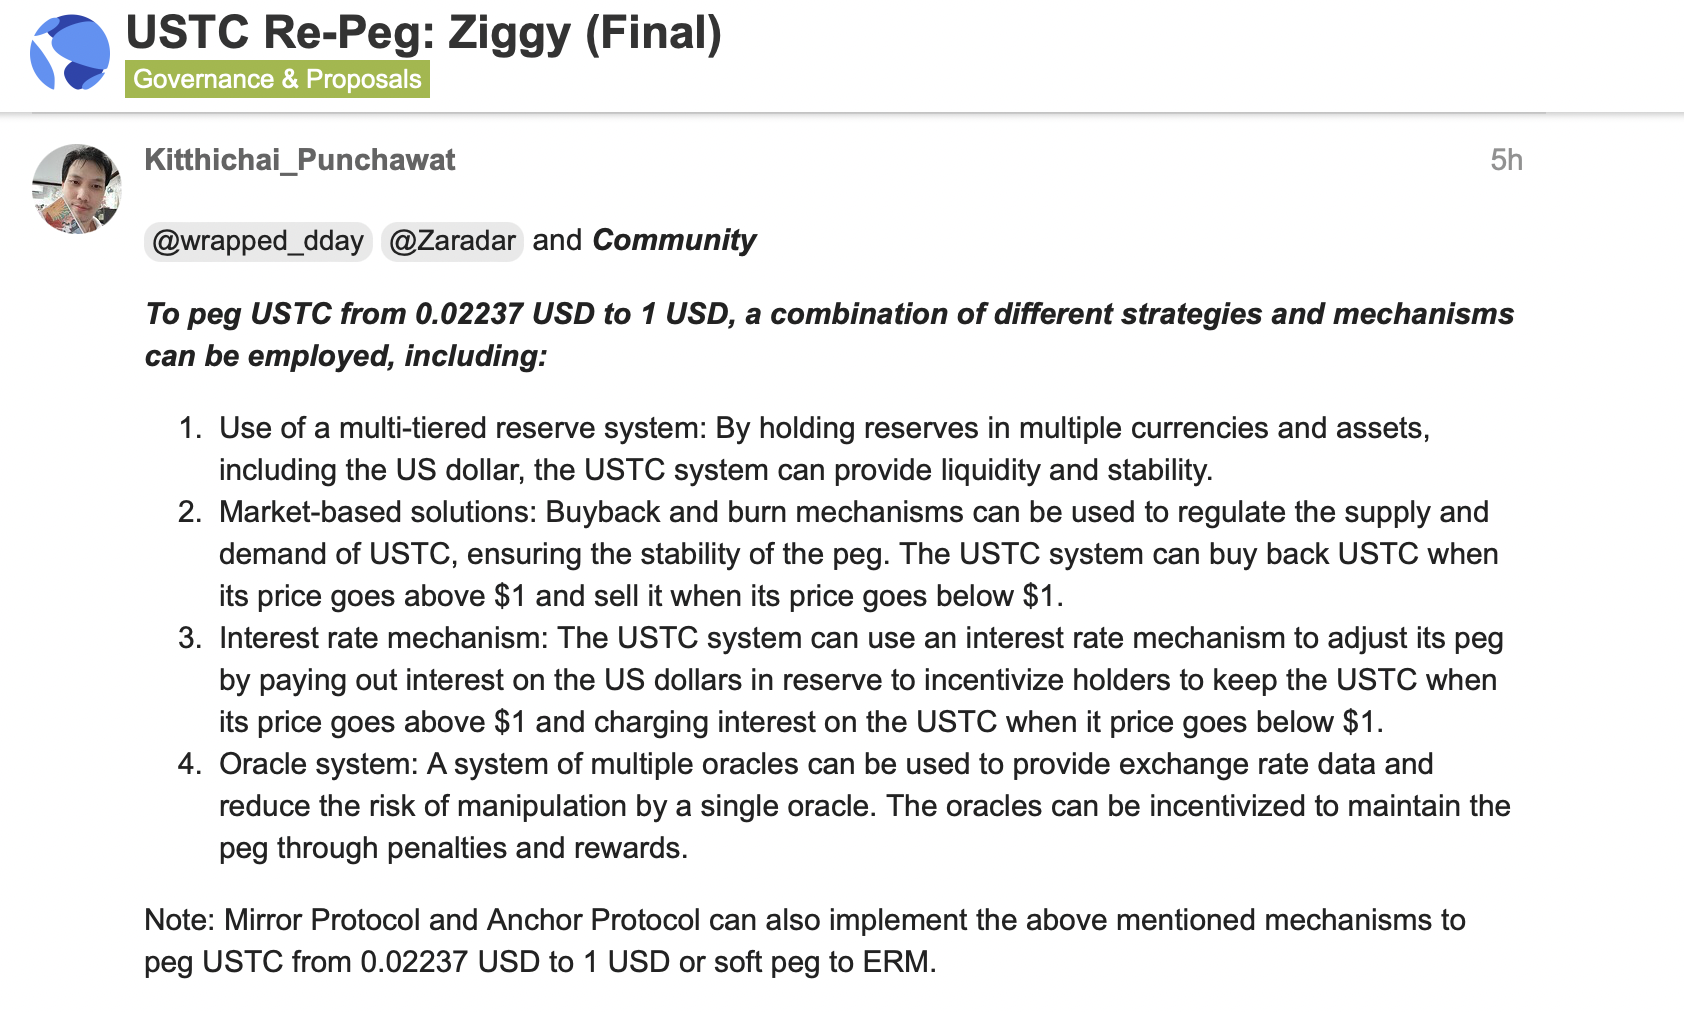 Proposal to re-peg USTC to $1